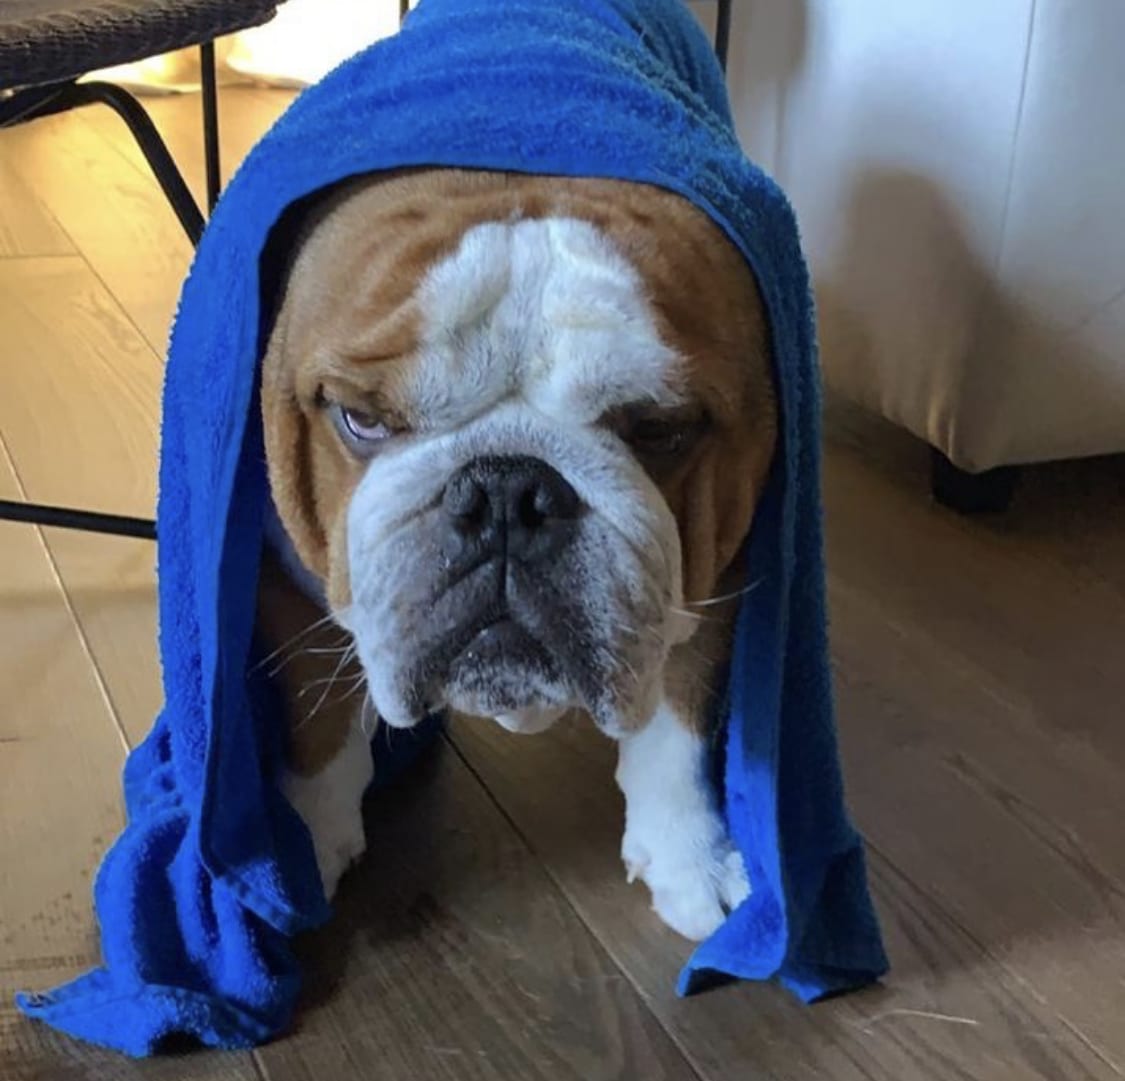 A grumpy English Bulldog standing on he floor with a towel over his head